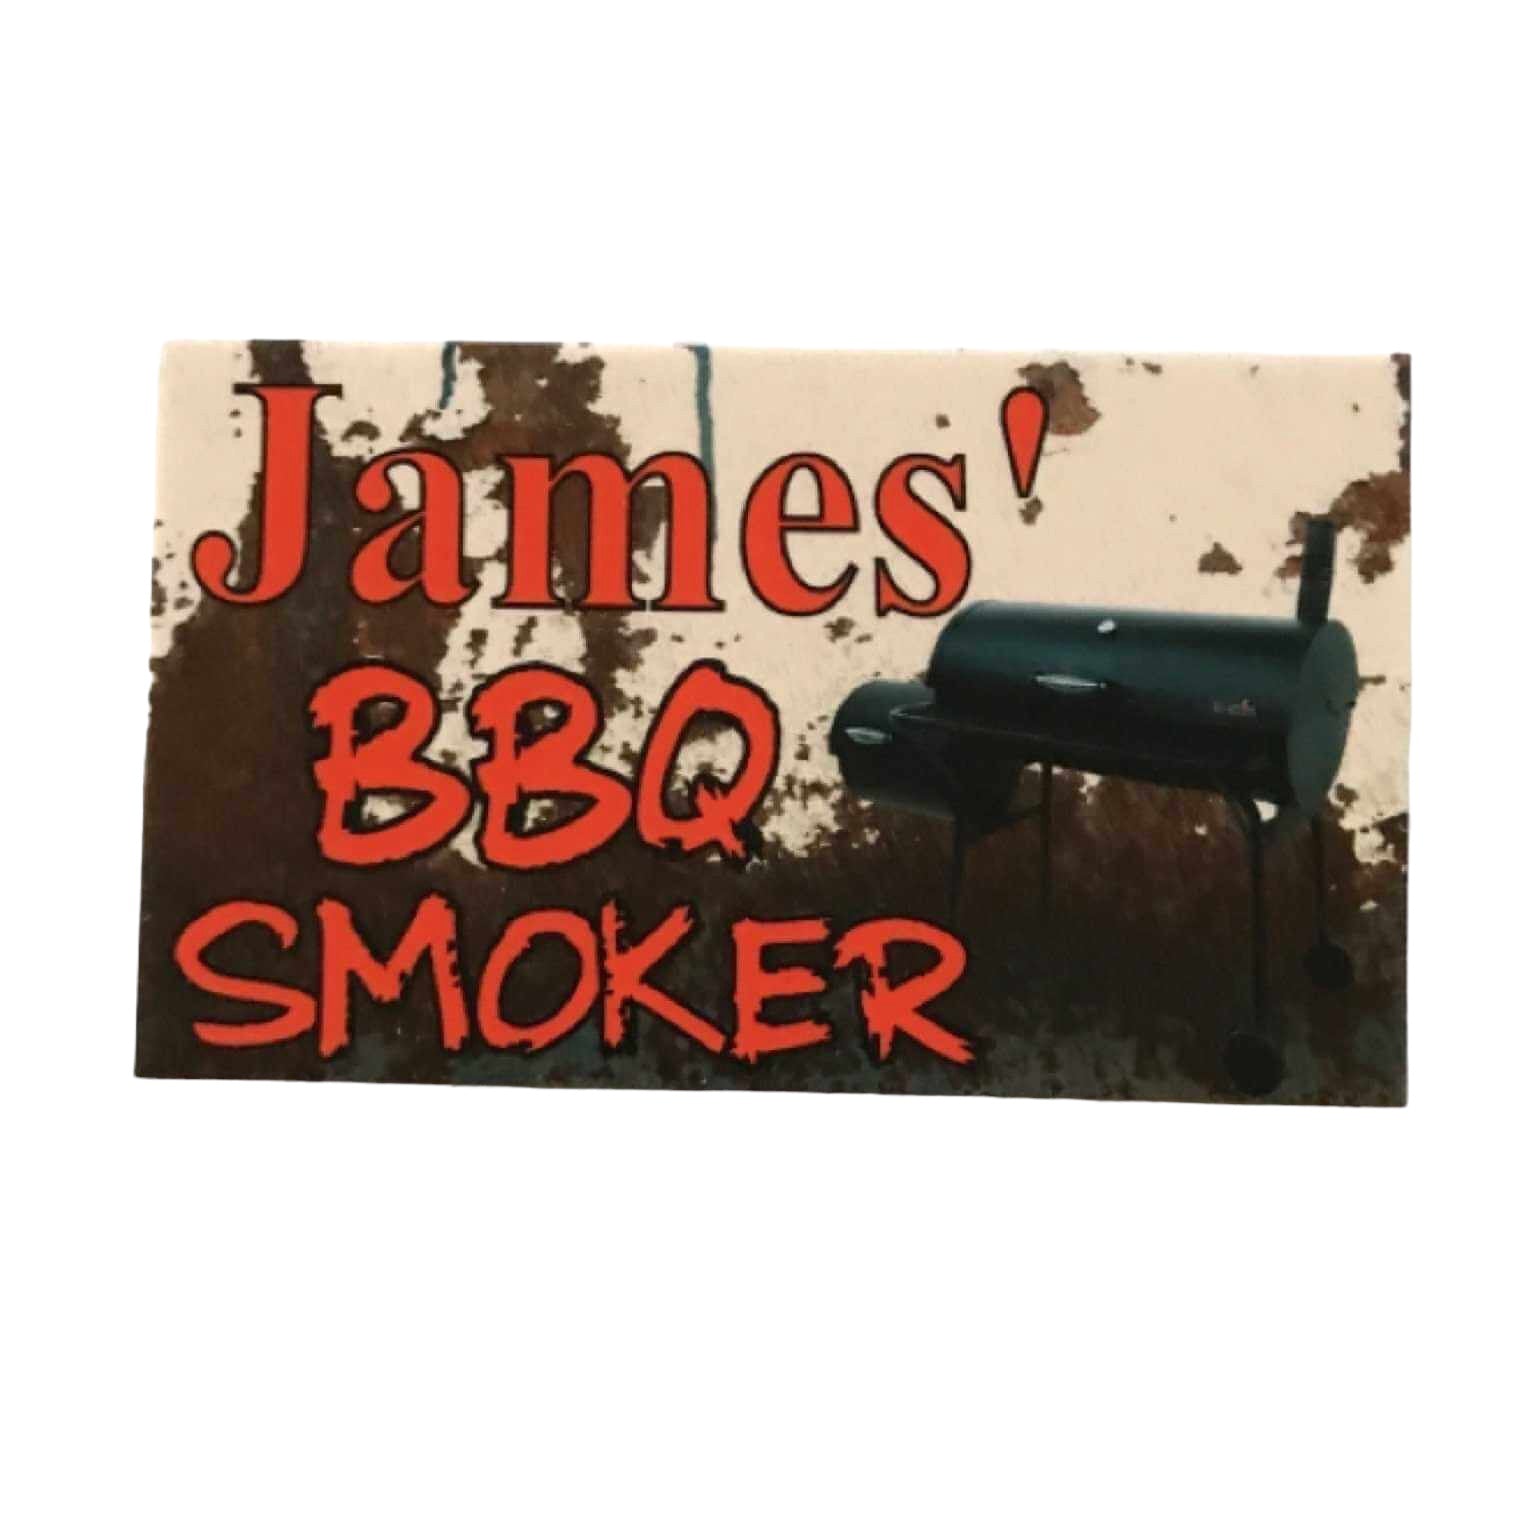 BBQ Smoker Custom Personalised Sign - The Renmy Store Homewares & Gifts 